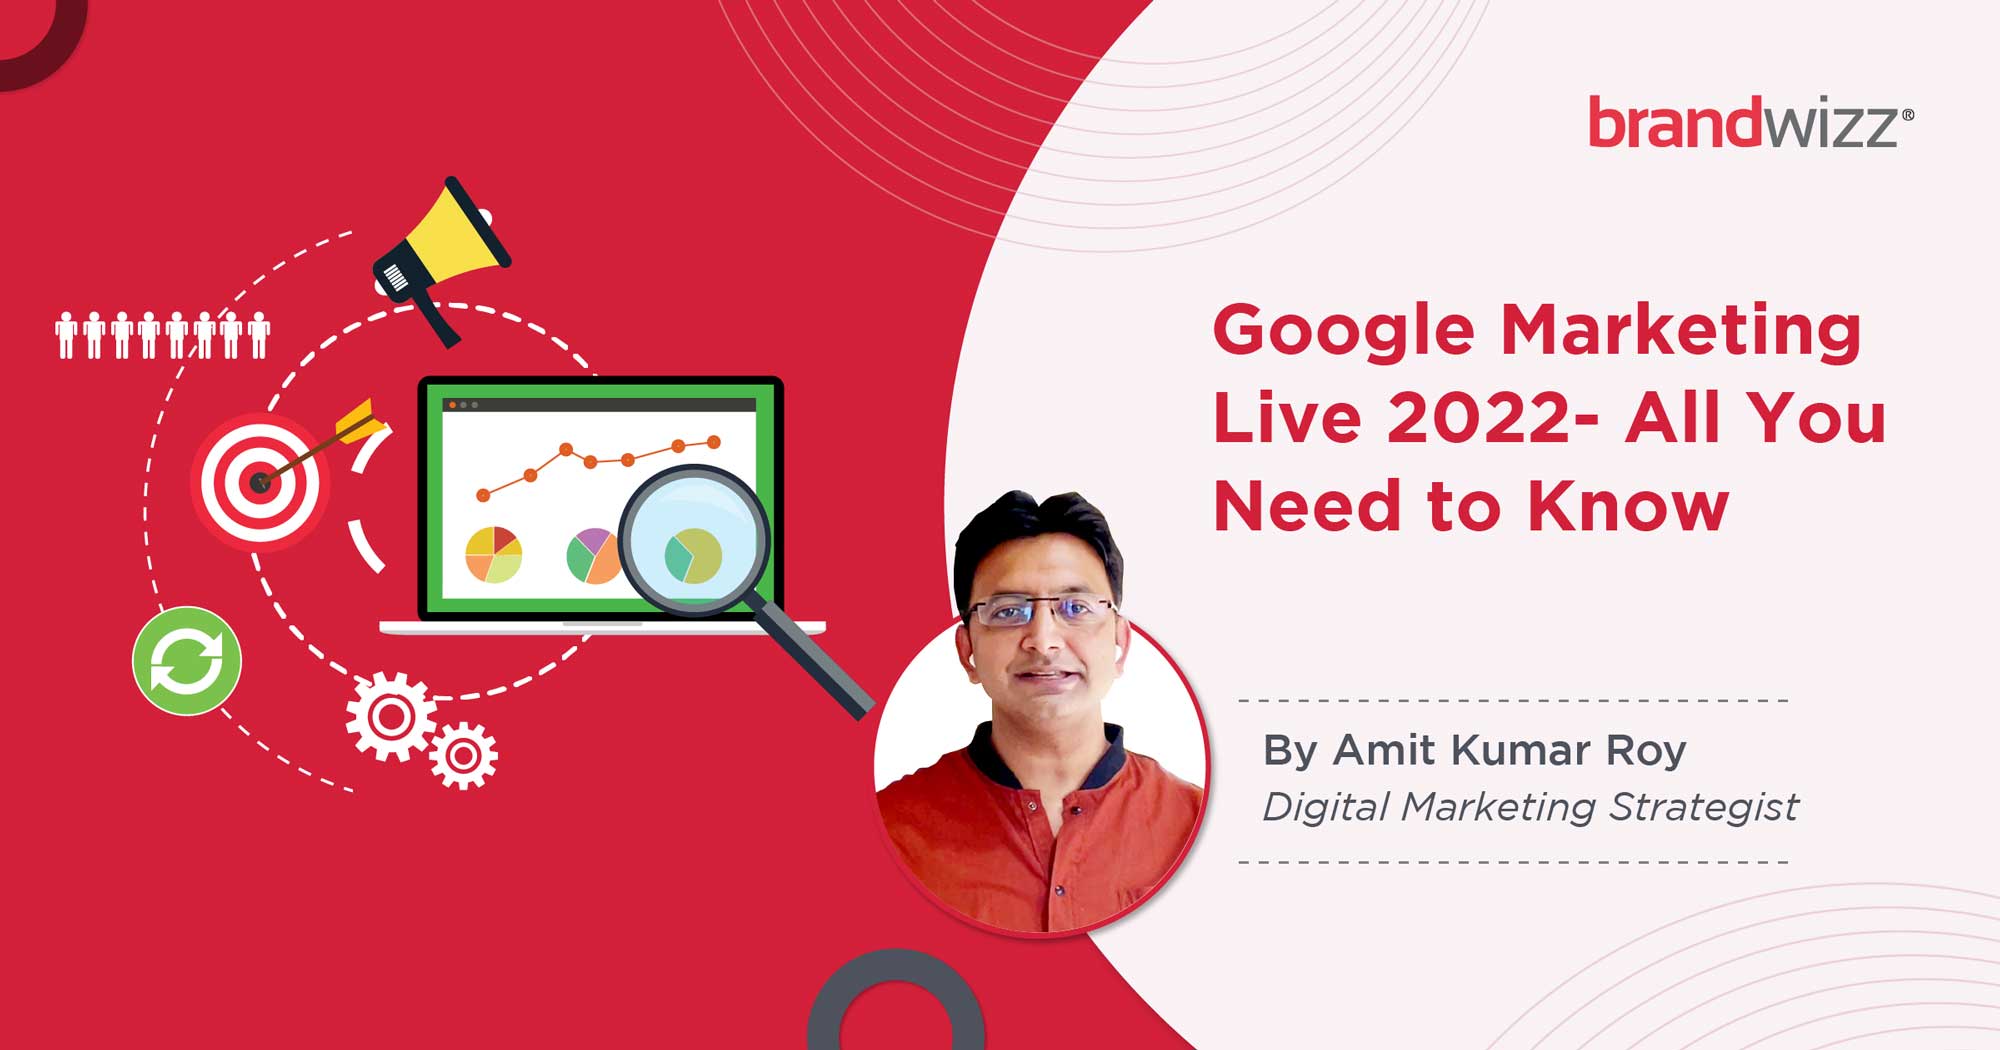 Google Marketing Live 2022- All You Need to Know